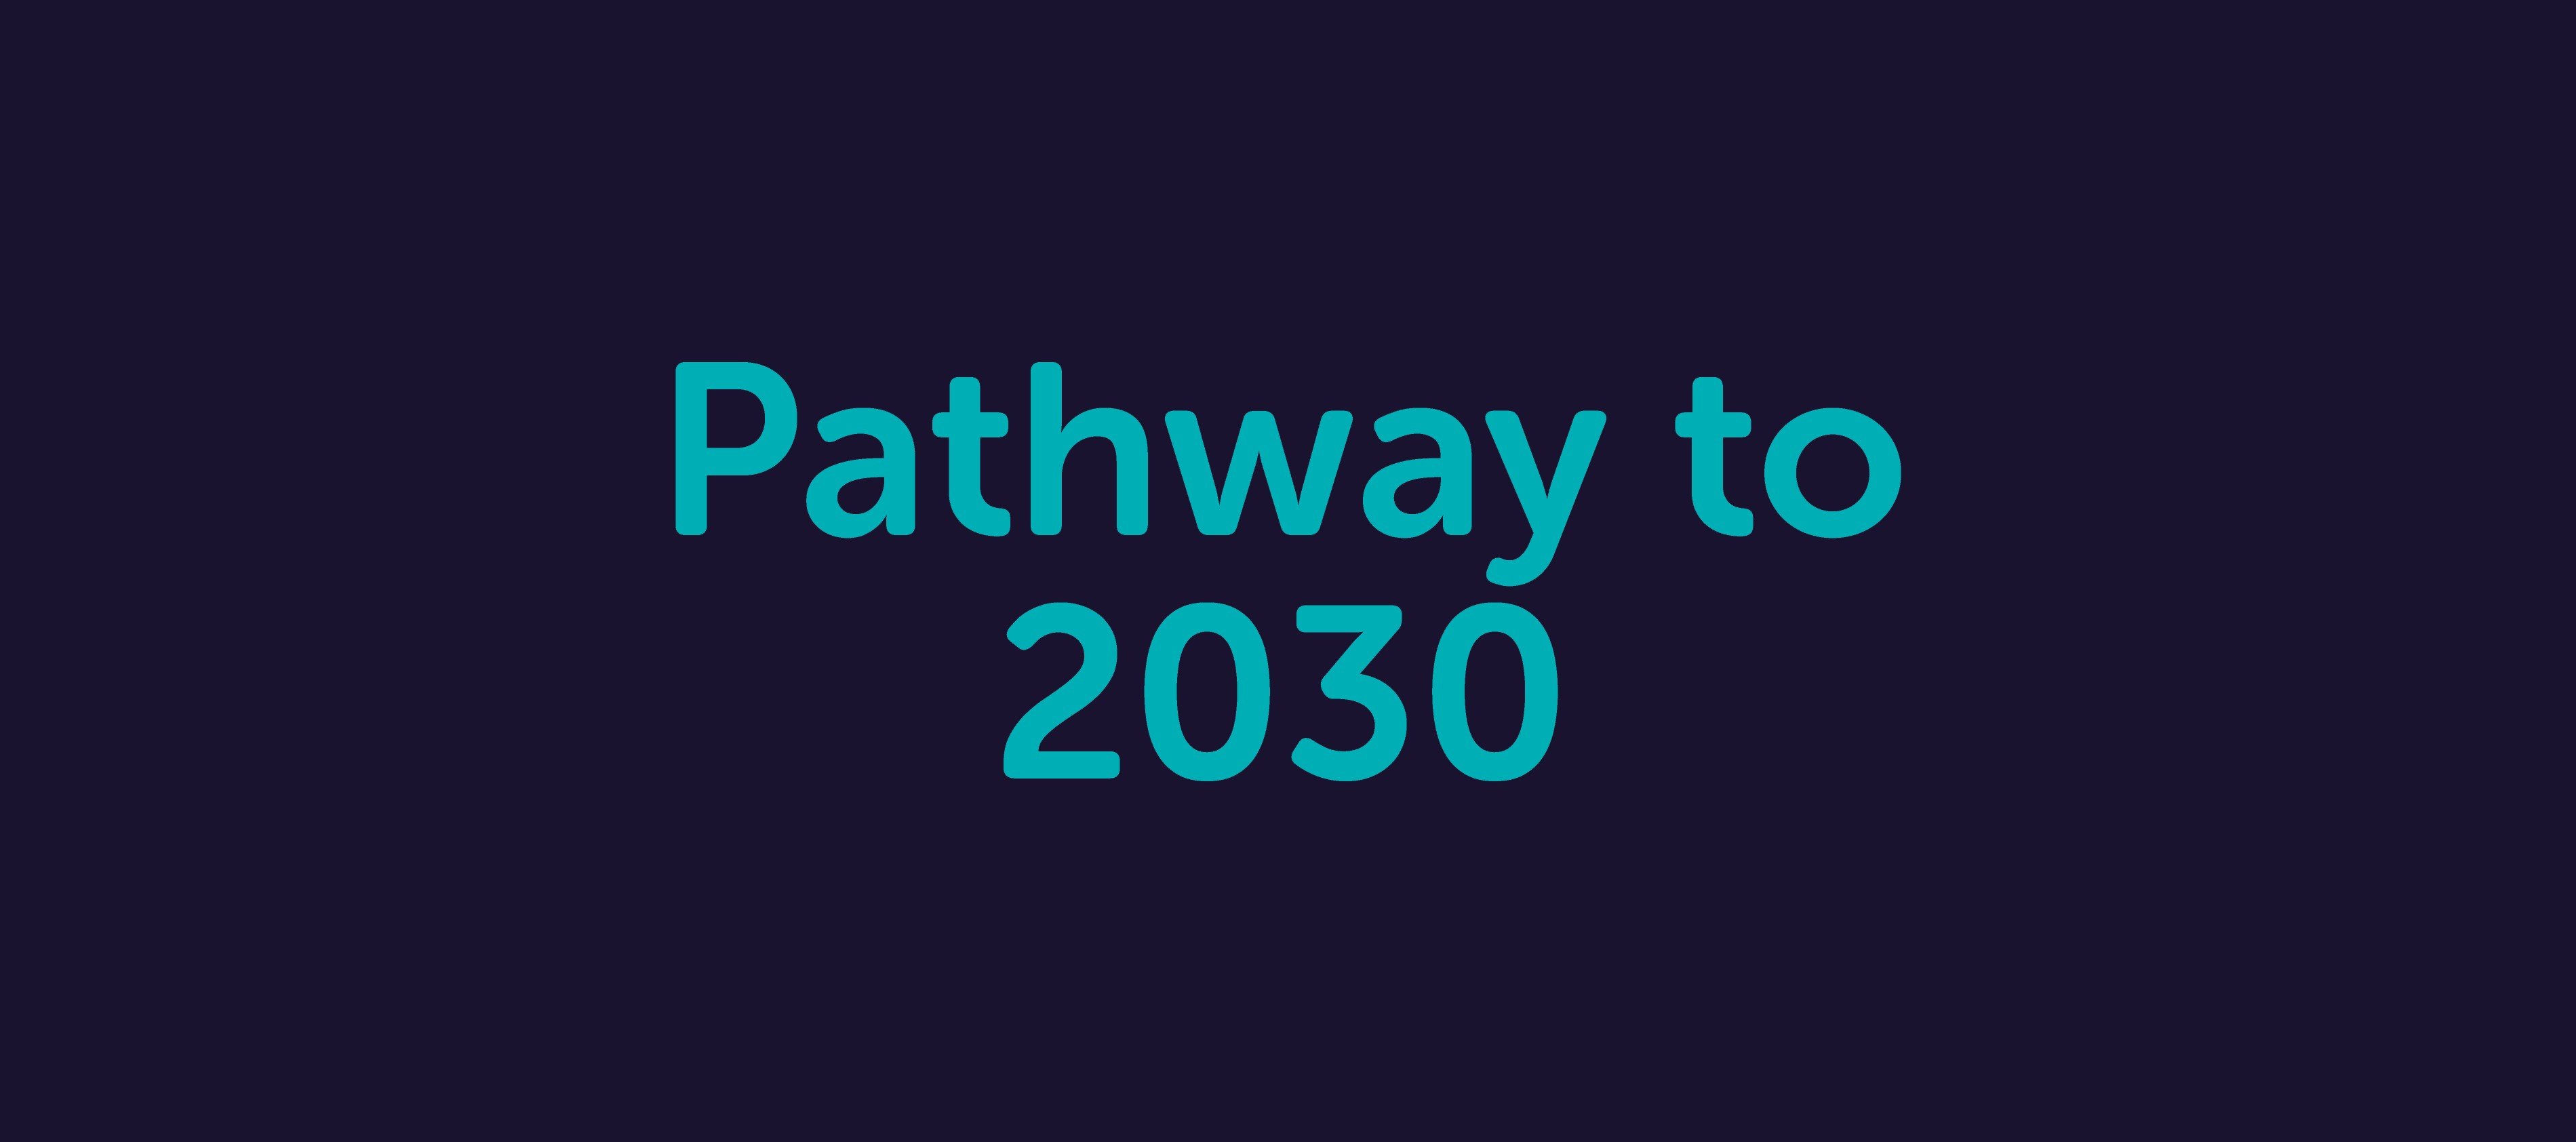 Pathway to 2030